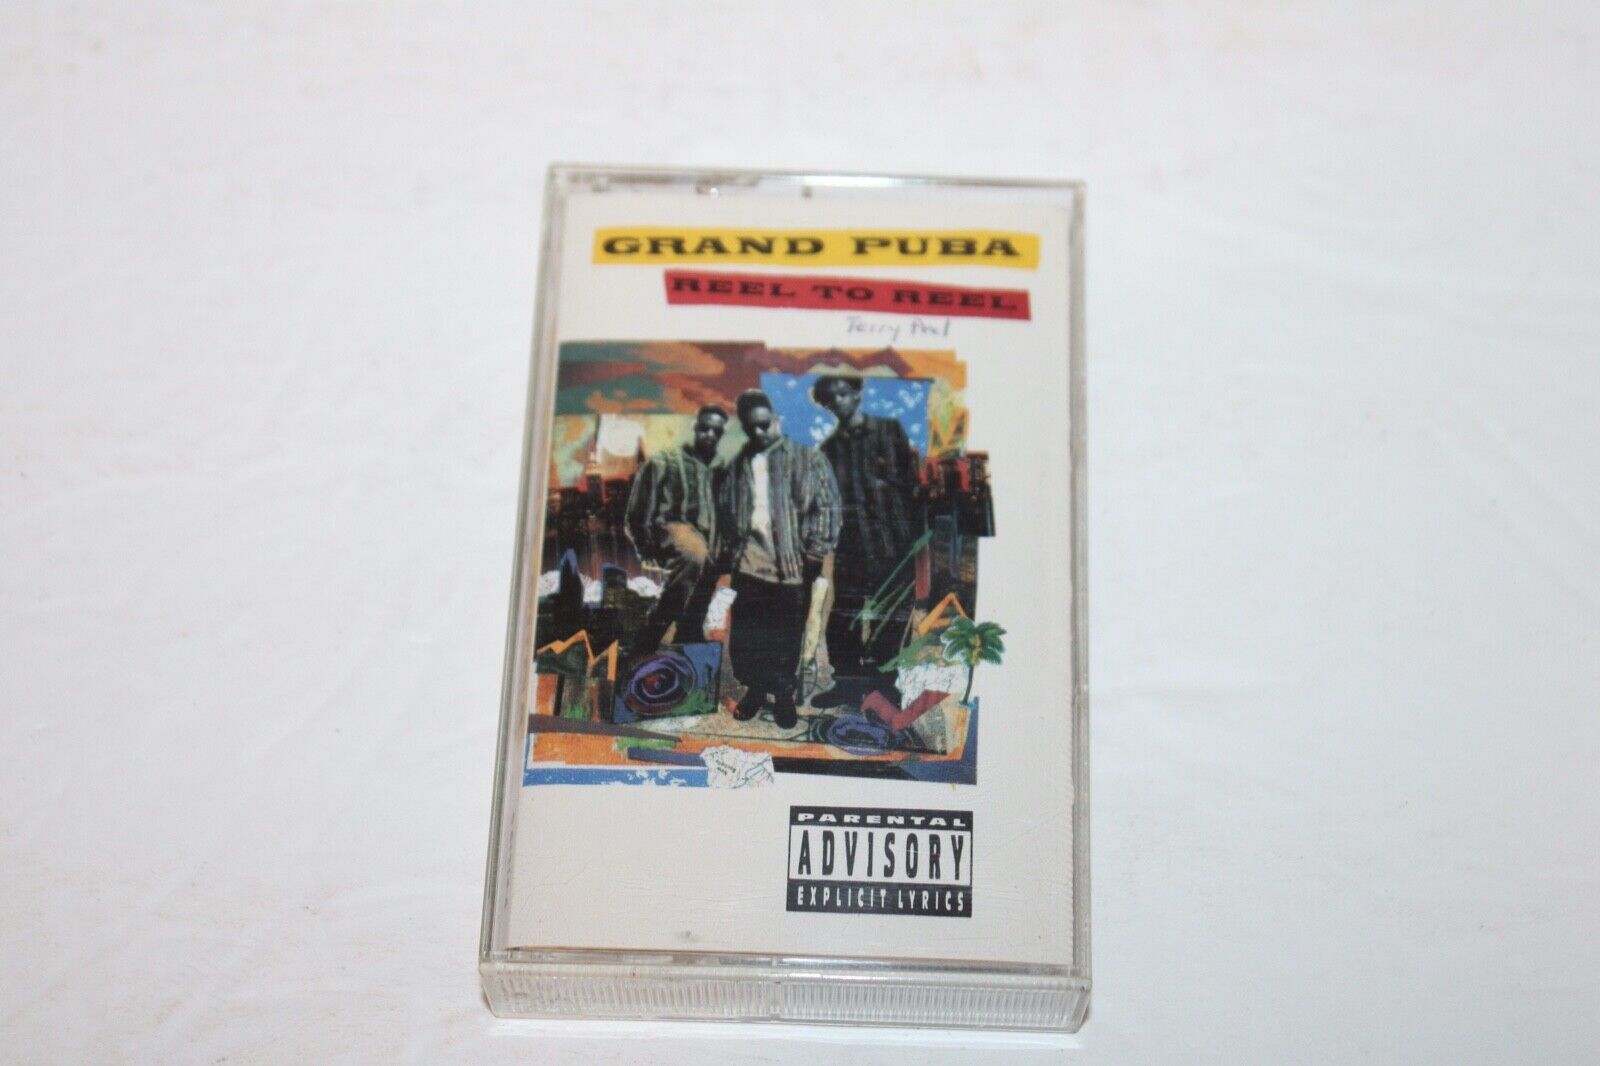 Grand Puba Reel To Reel Cassette Tape Mary J Blige 360 Check it Out 1992